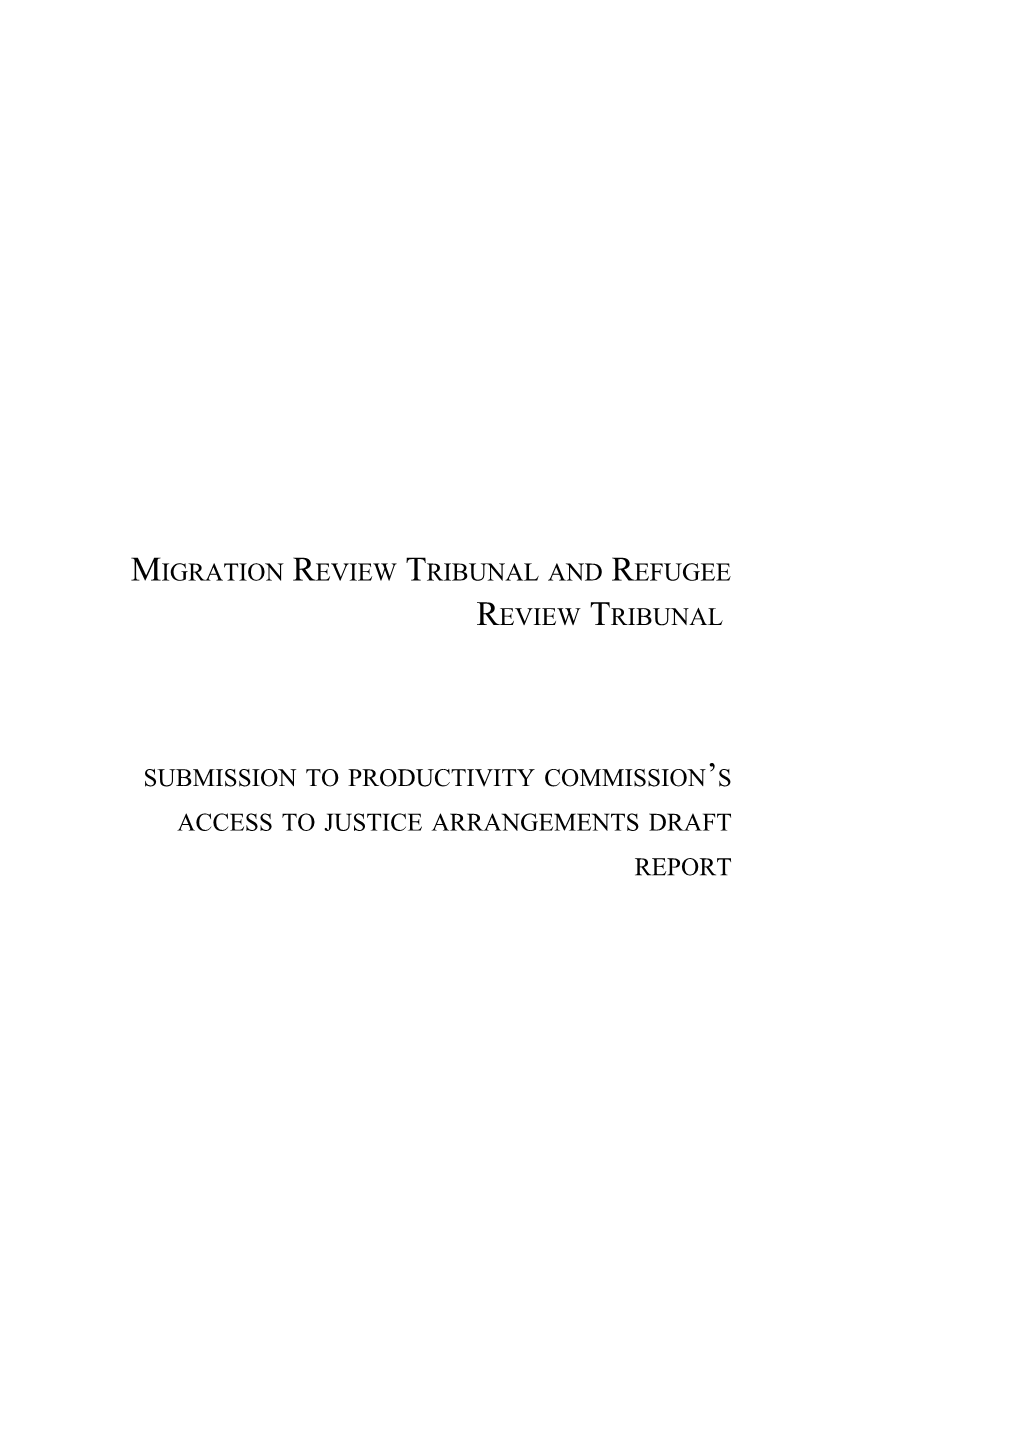 Submission DR188 - Migration Review Tribunal and Refugee Review Tribunal - Access to Justice